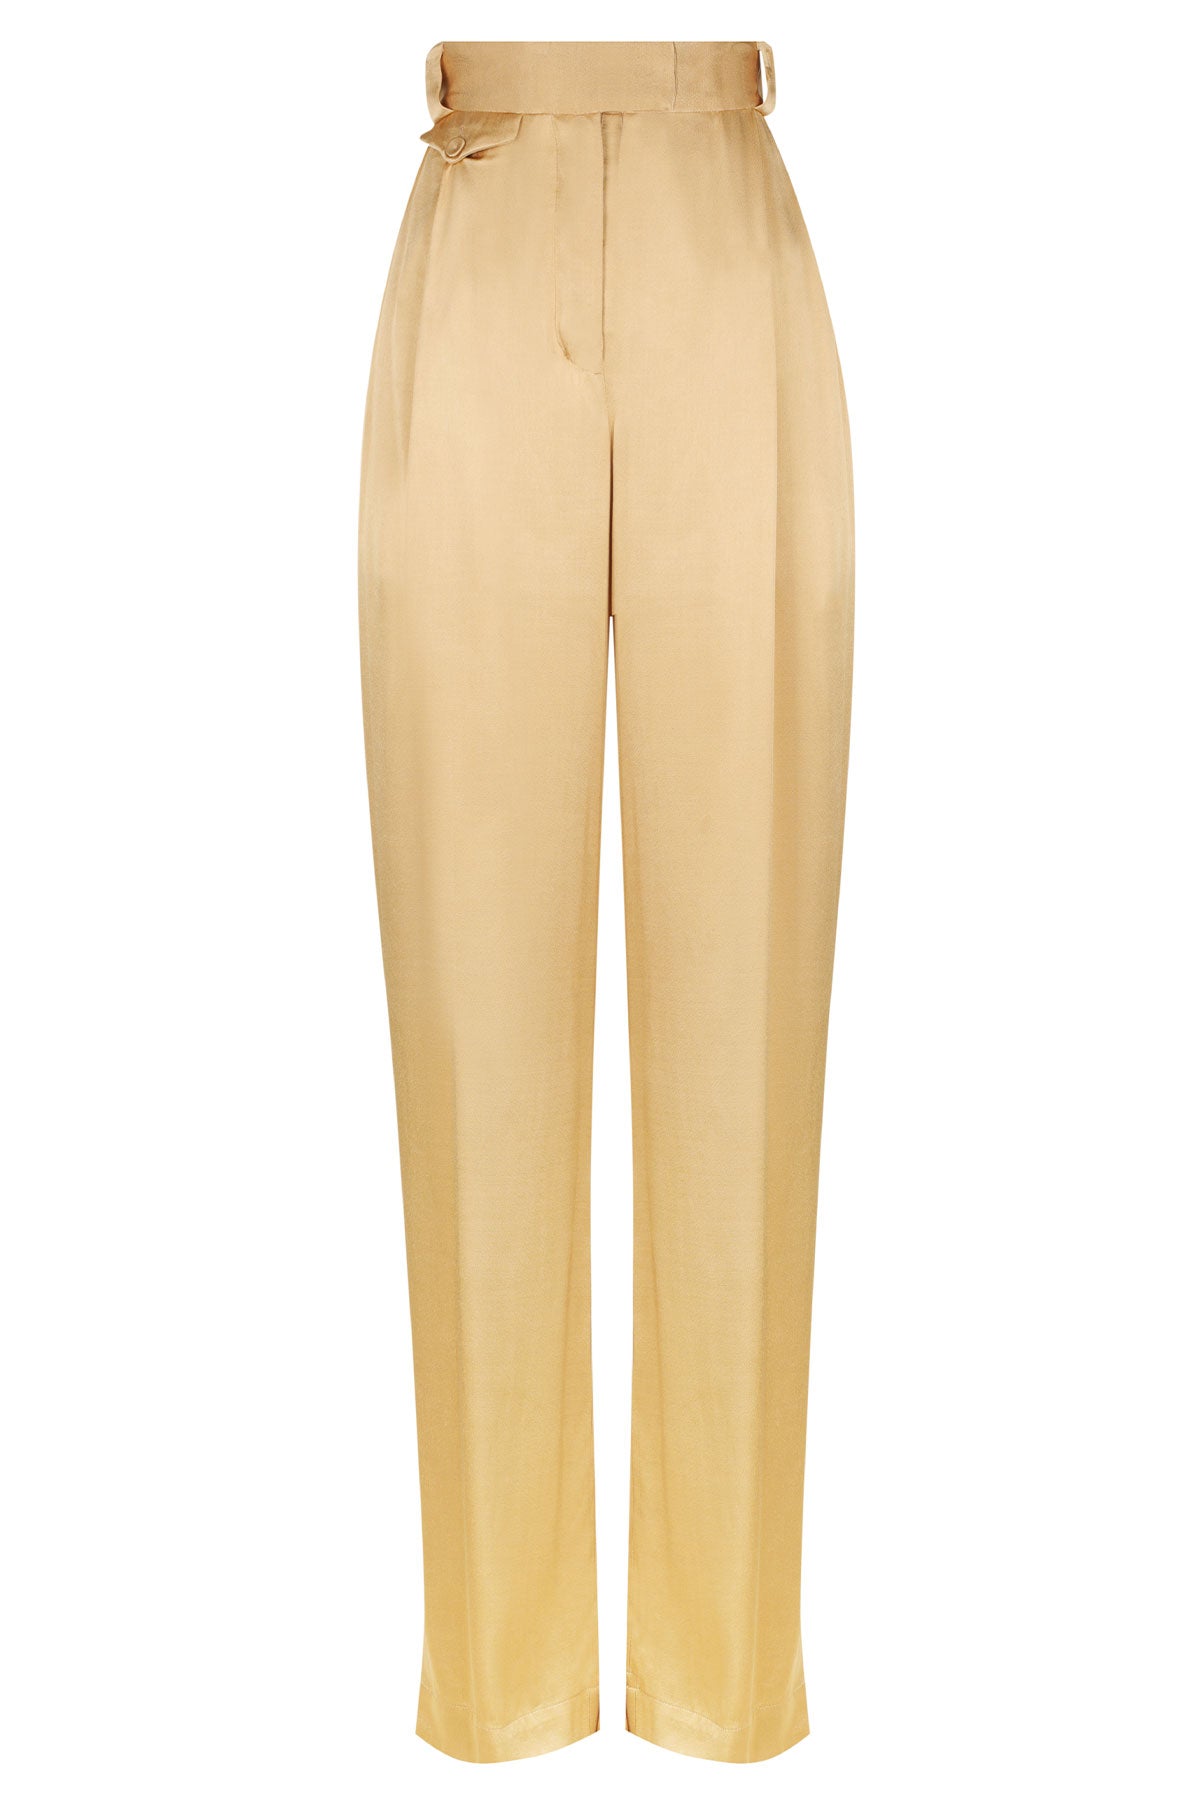 Oliviera High Waisted Tailored Pants